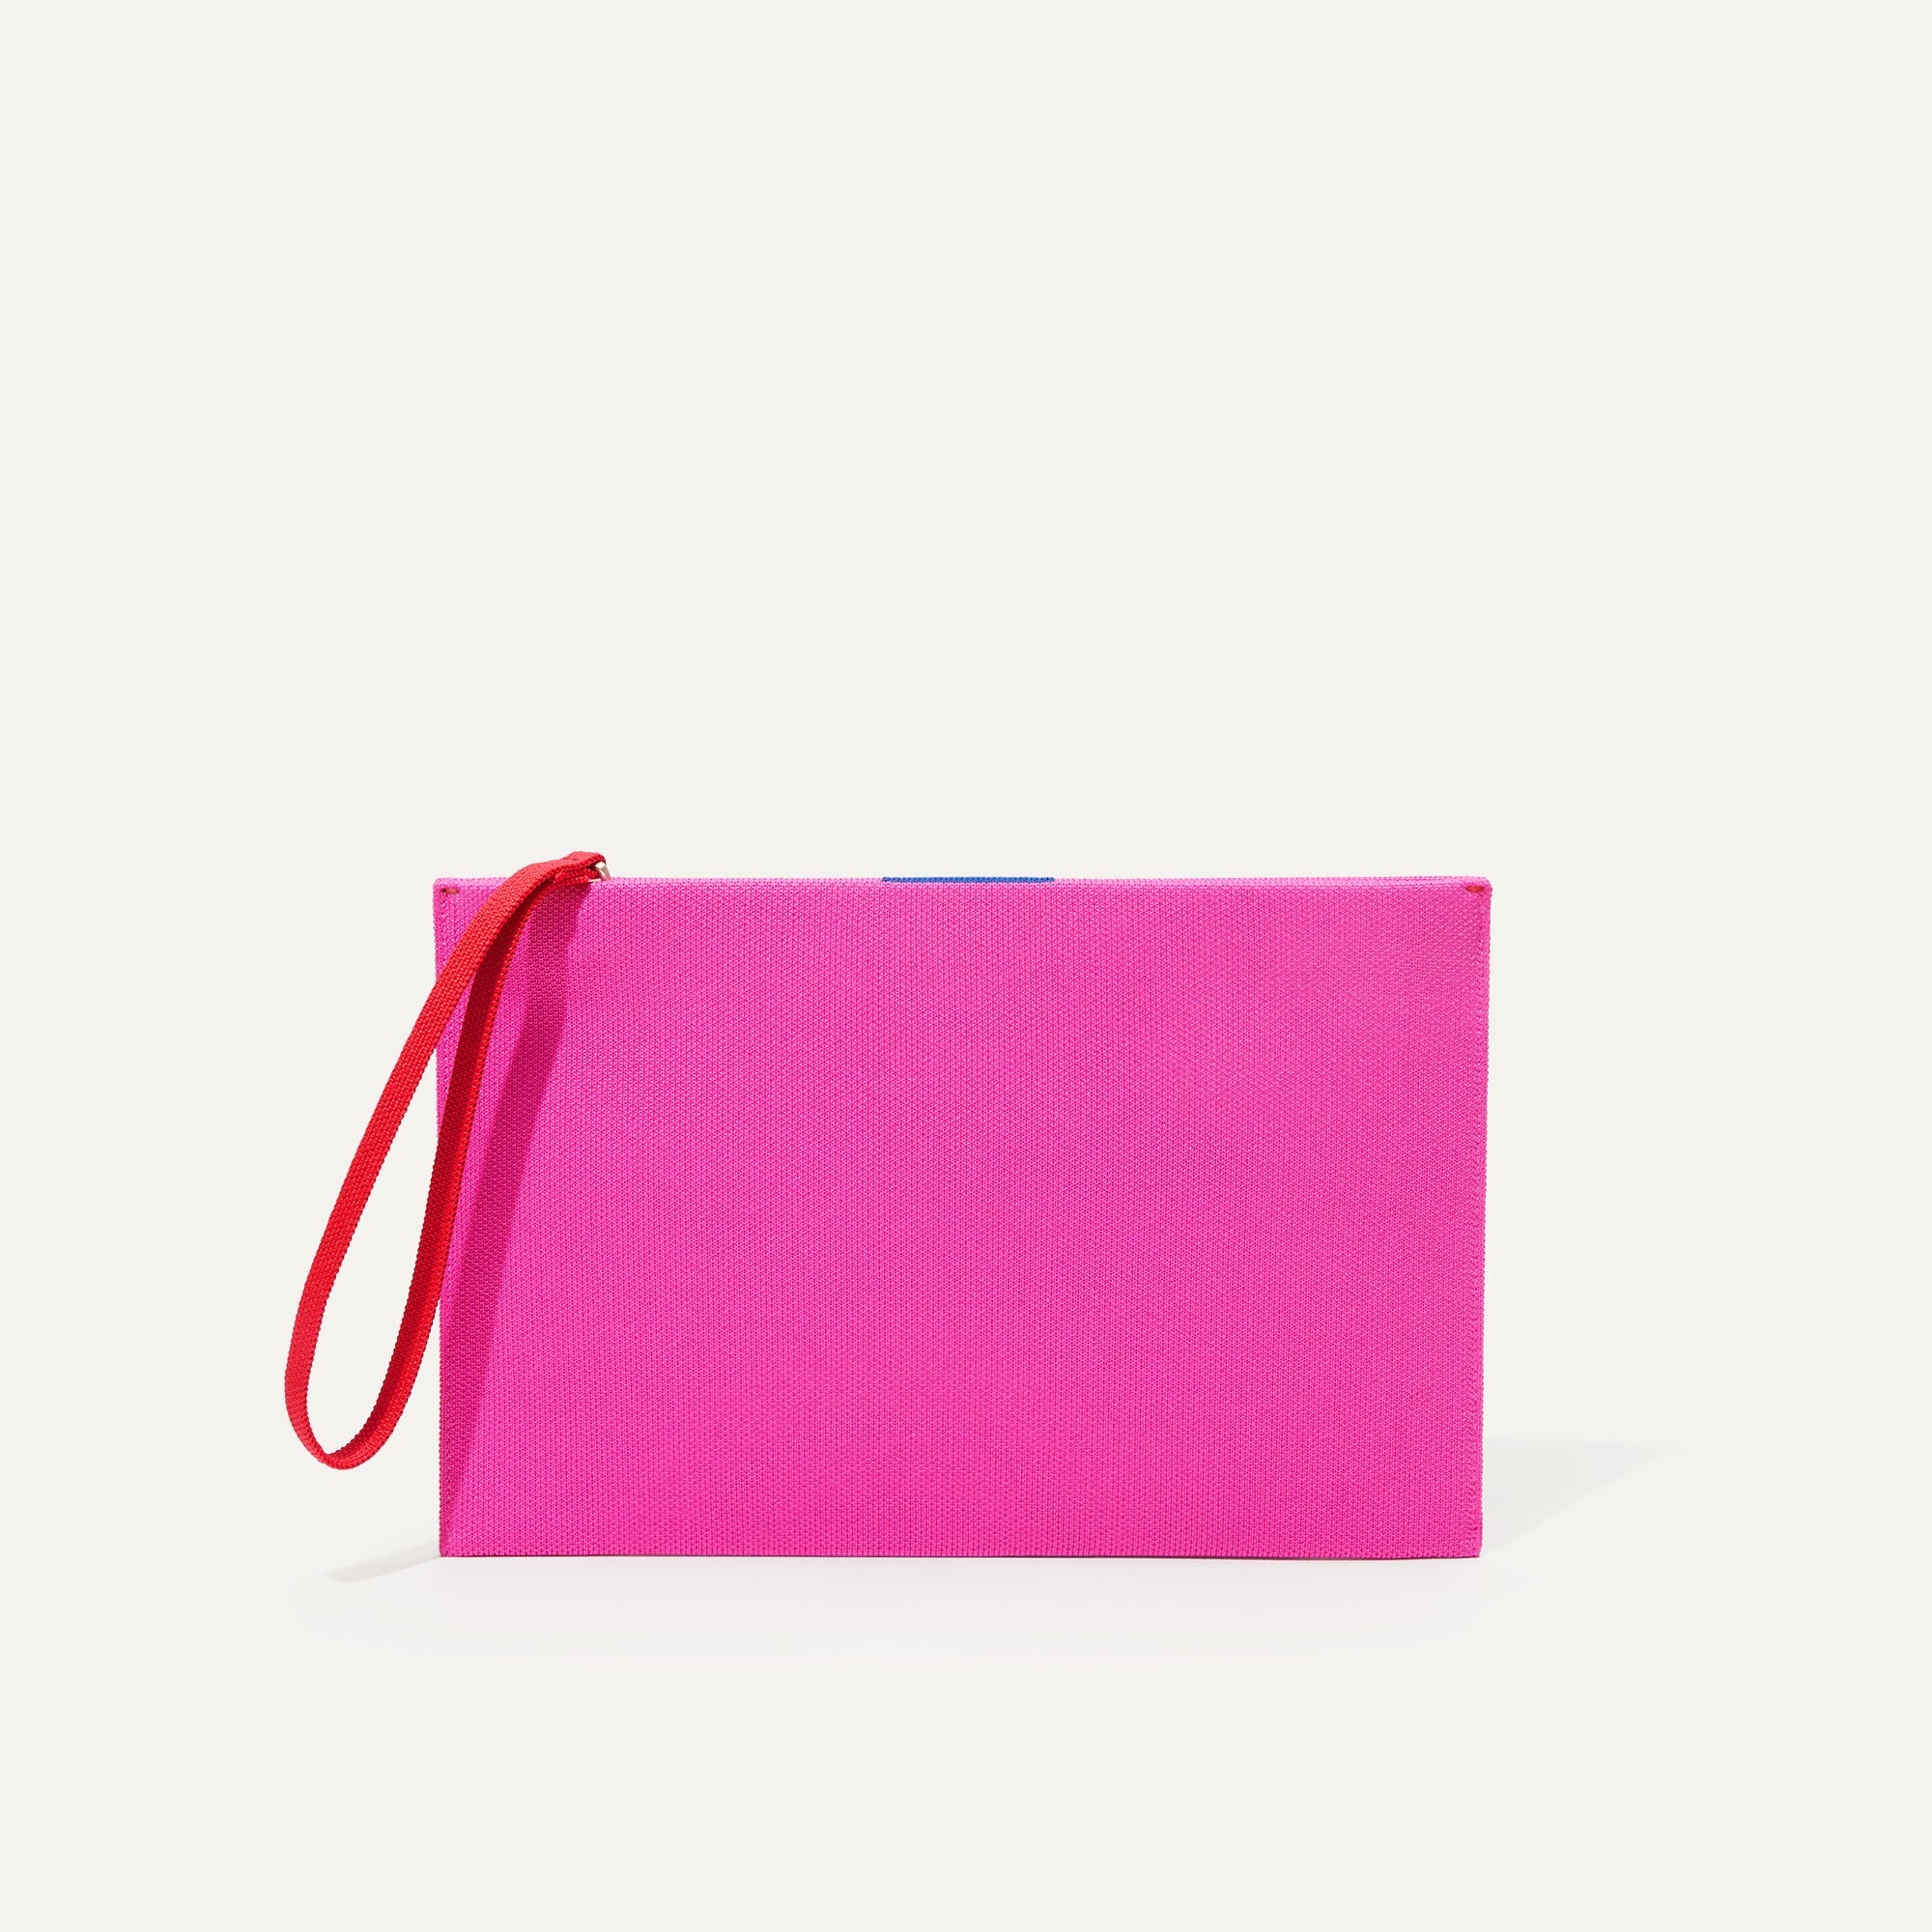 The Wristlet in Dragon Fruit | Women's Pouches | Rothy's